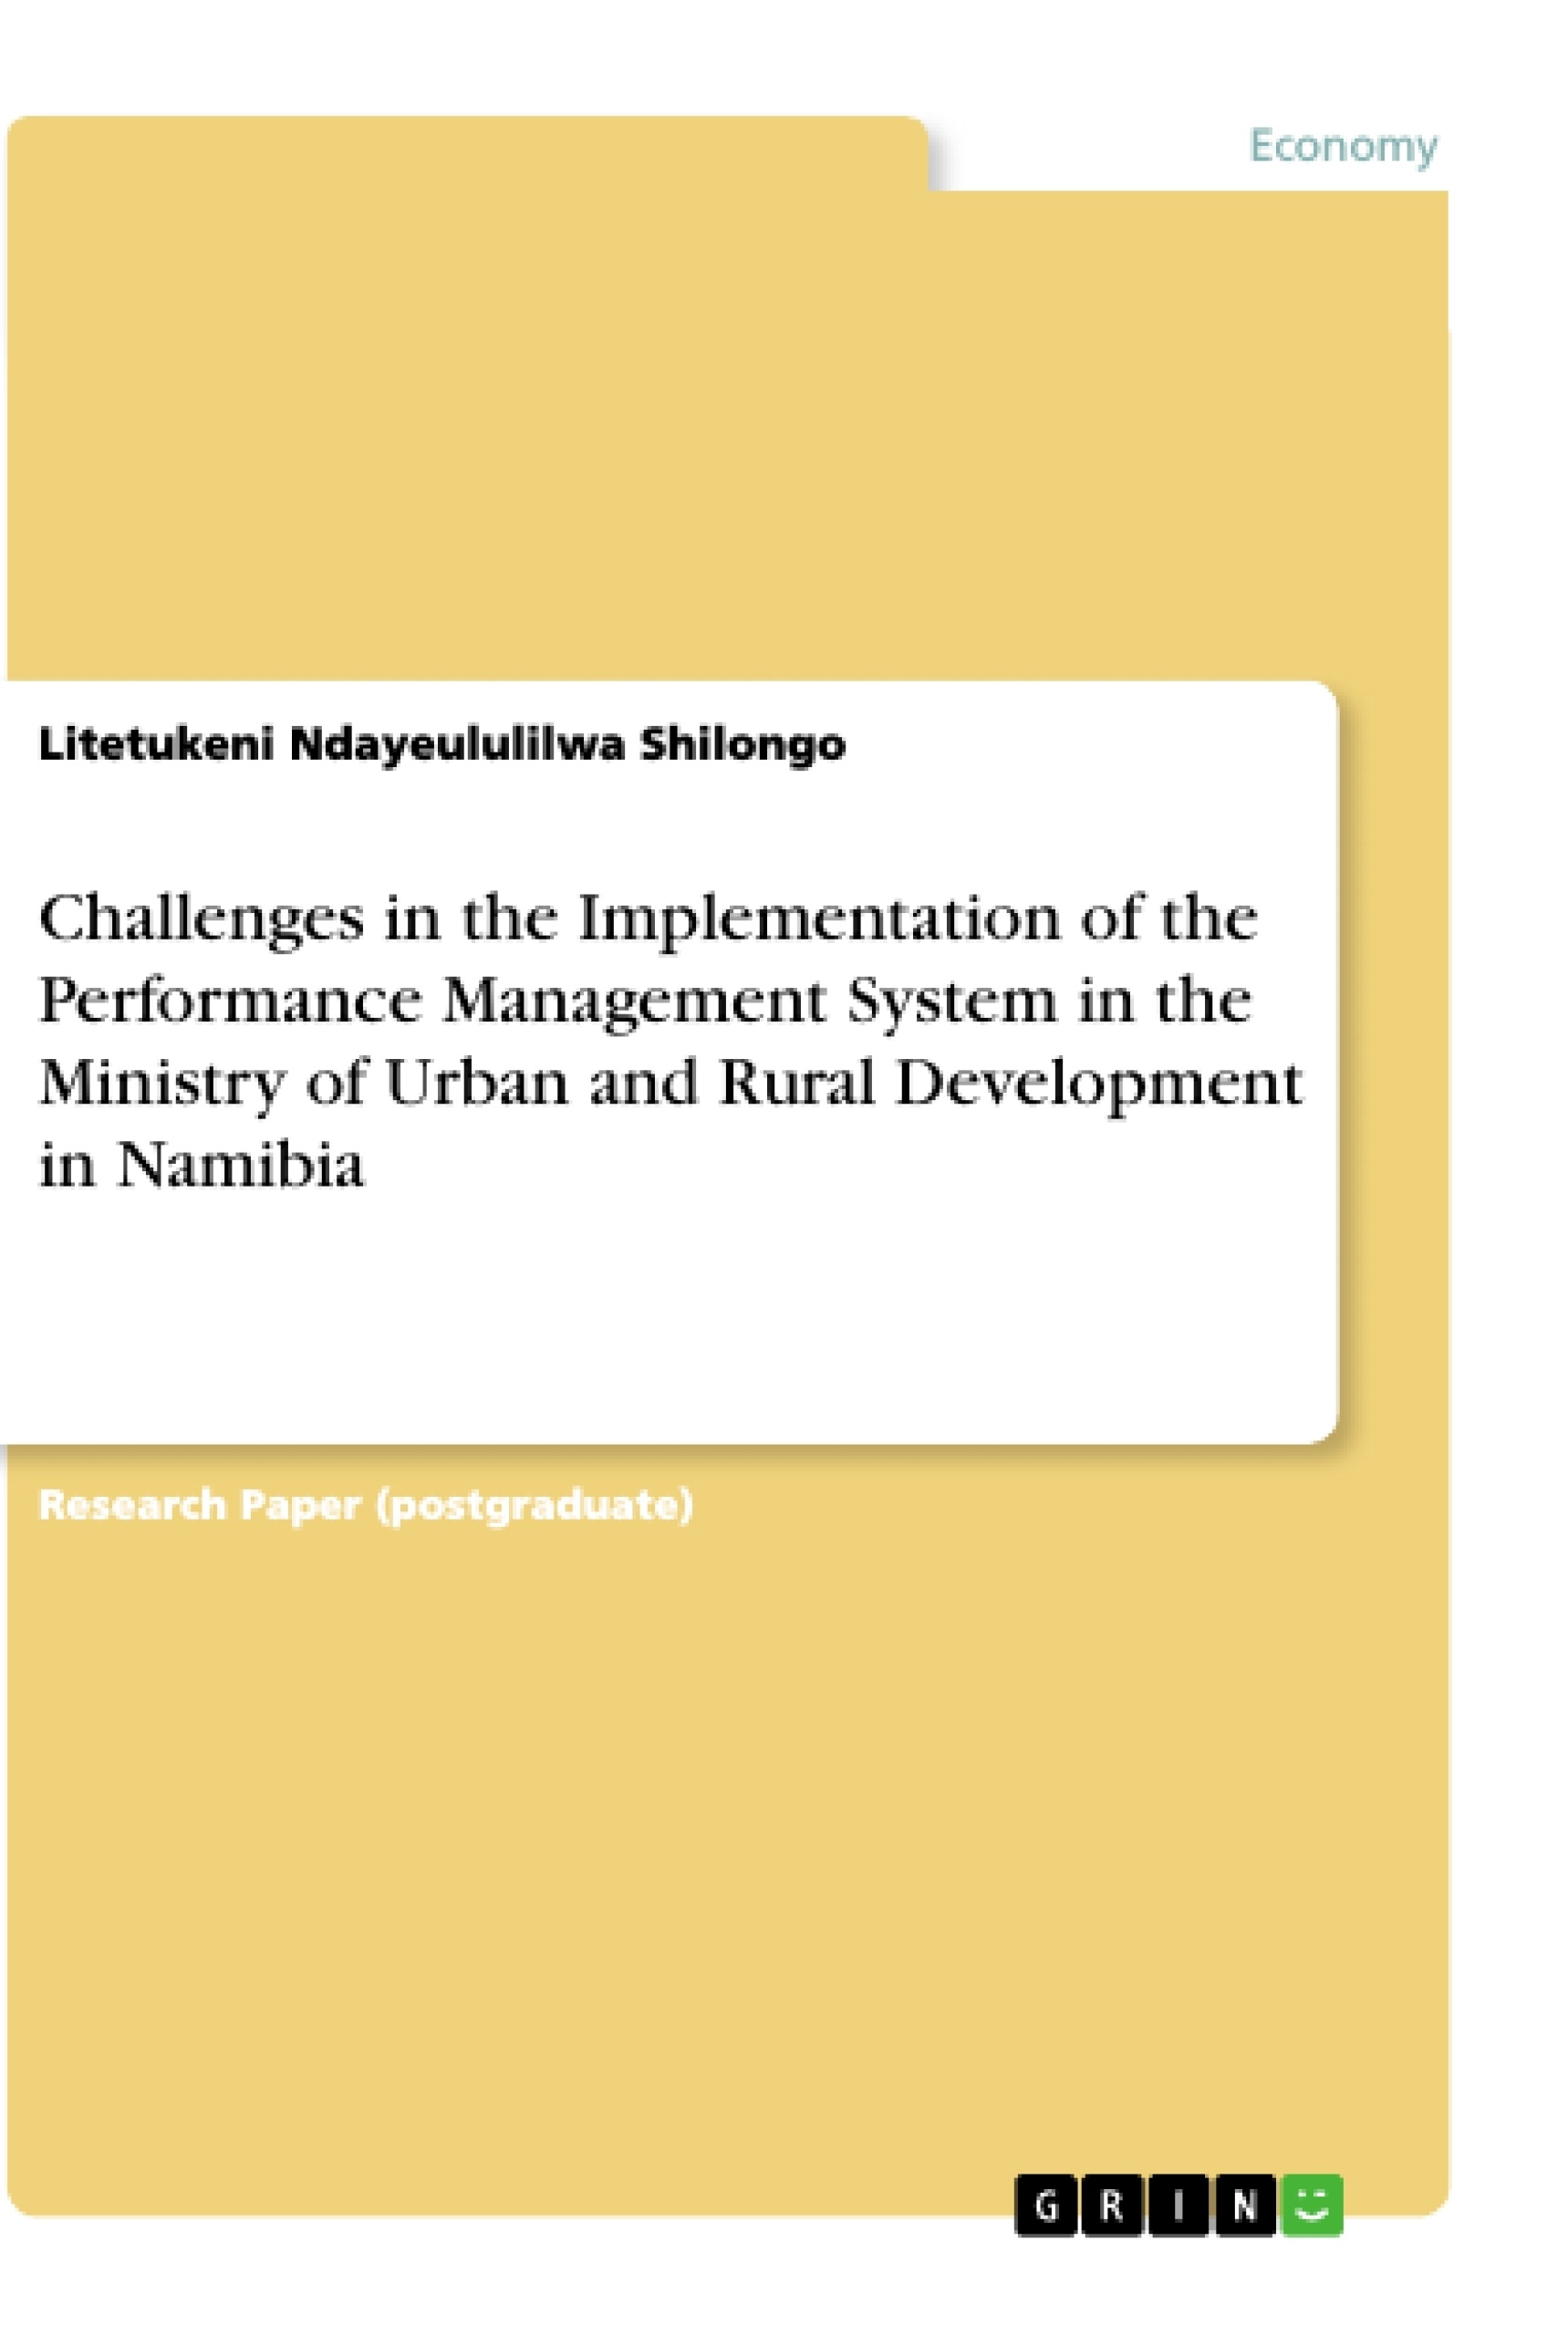 Title: Challenges in the Implementation of the Performance Management System in the Ministry of Urban and Rural Development in Namibia